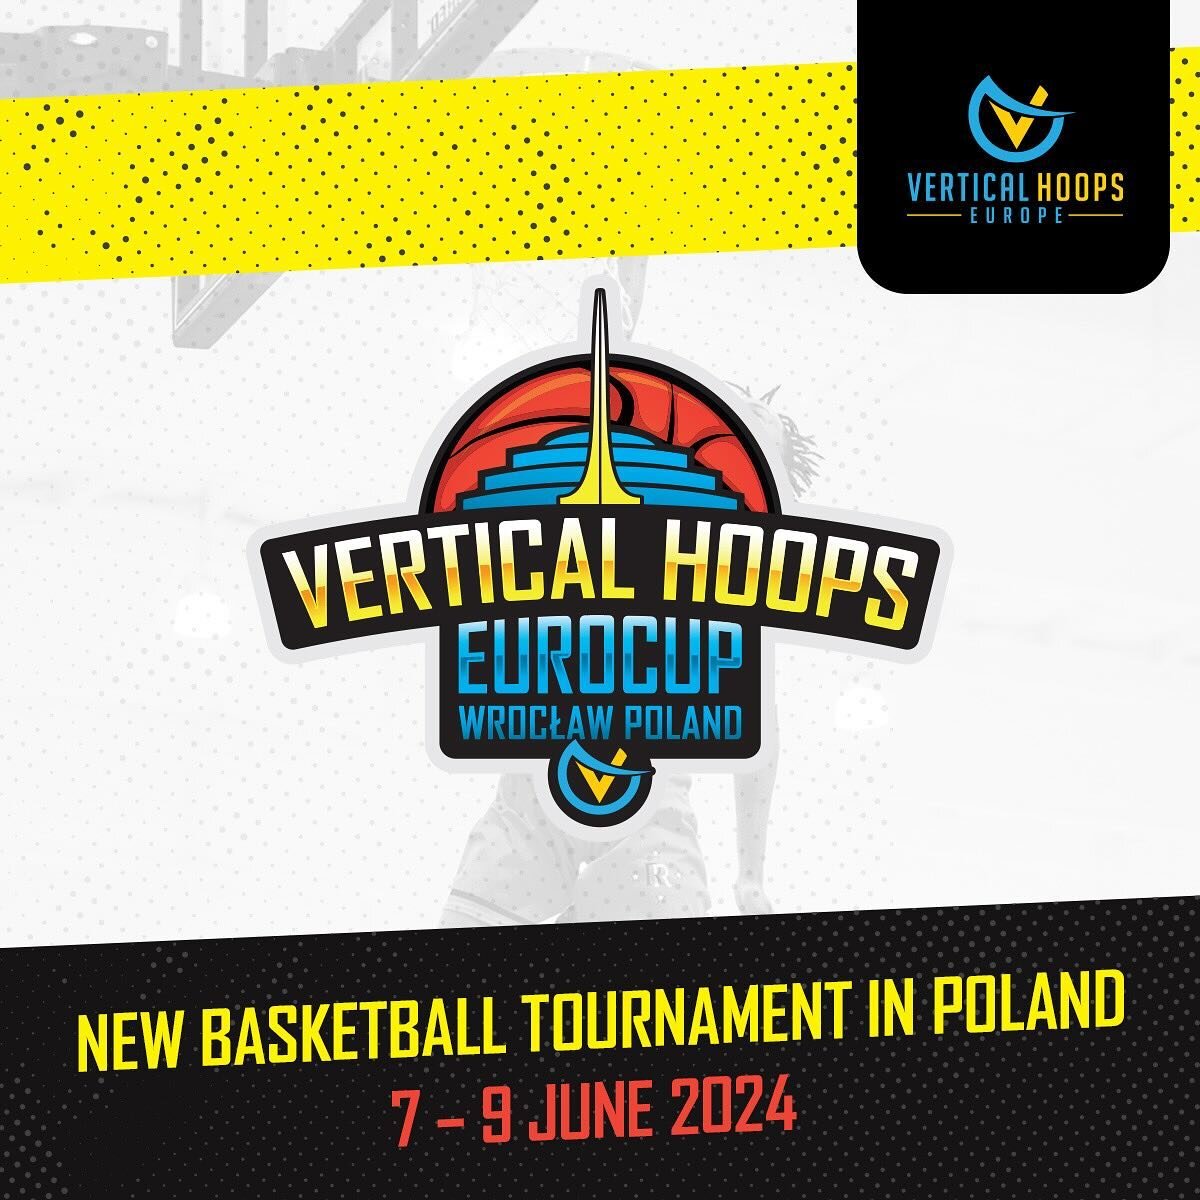 Vertical Hoops EuroCup June 7-9 is locked in and ready to go‼️ Teams from all over Europe will descend on Wrocław, Poland to compete in the first Vertical Hoops tournament in Europe. In a collaborative effort with @roadtosport we are excited to begin